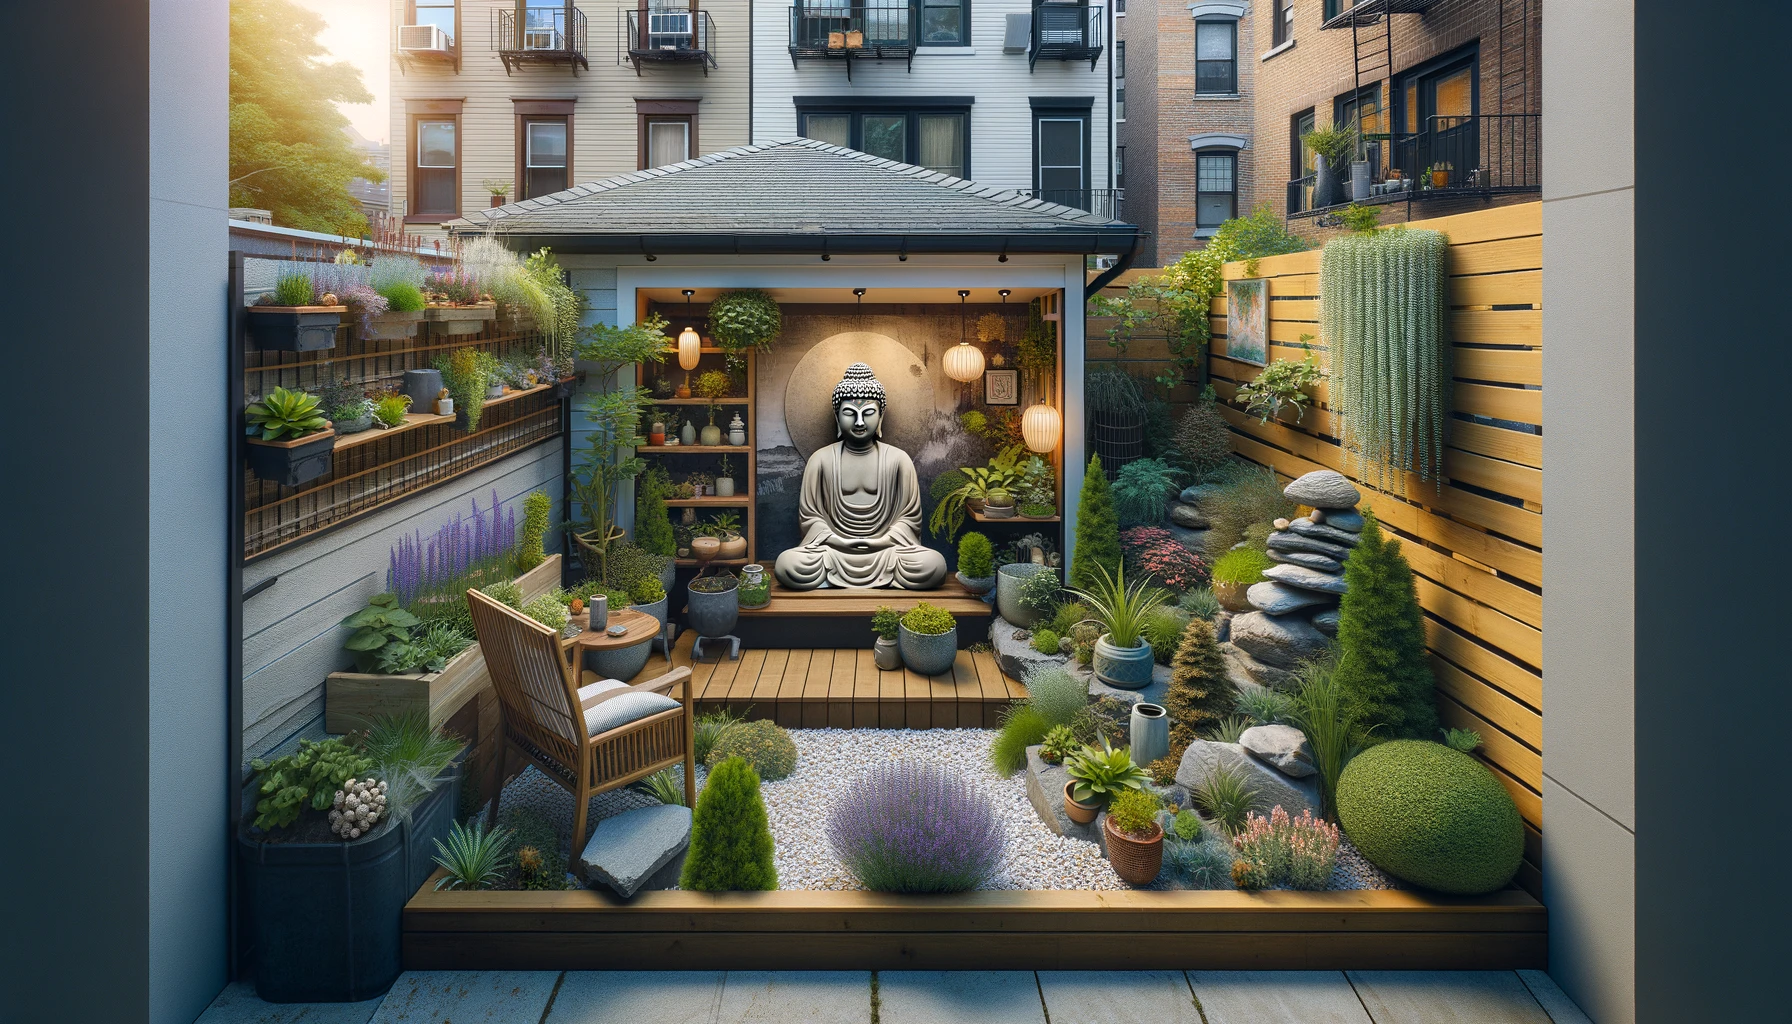 An urban Buddha garden creatively designed for a city backyard. This image showcases a small, private garden area set against a typical urban home with a view of neighboring buildings. It includes a small Buddha statue as the centerpiece, surrounded by a mix of perennial plants, shrubs, and decorative stones. The garden utilizes vertical space with hanging plants and features a small seating area for meditation, encapsulating a personal retreat in a bustling city environment